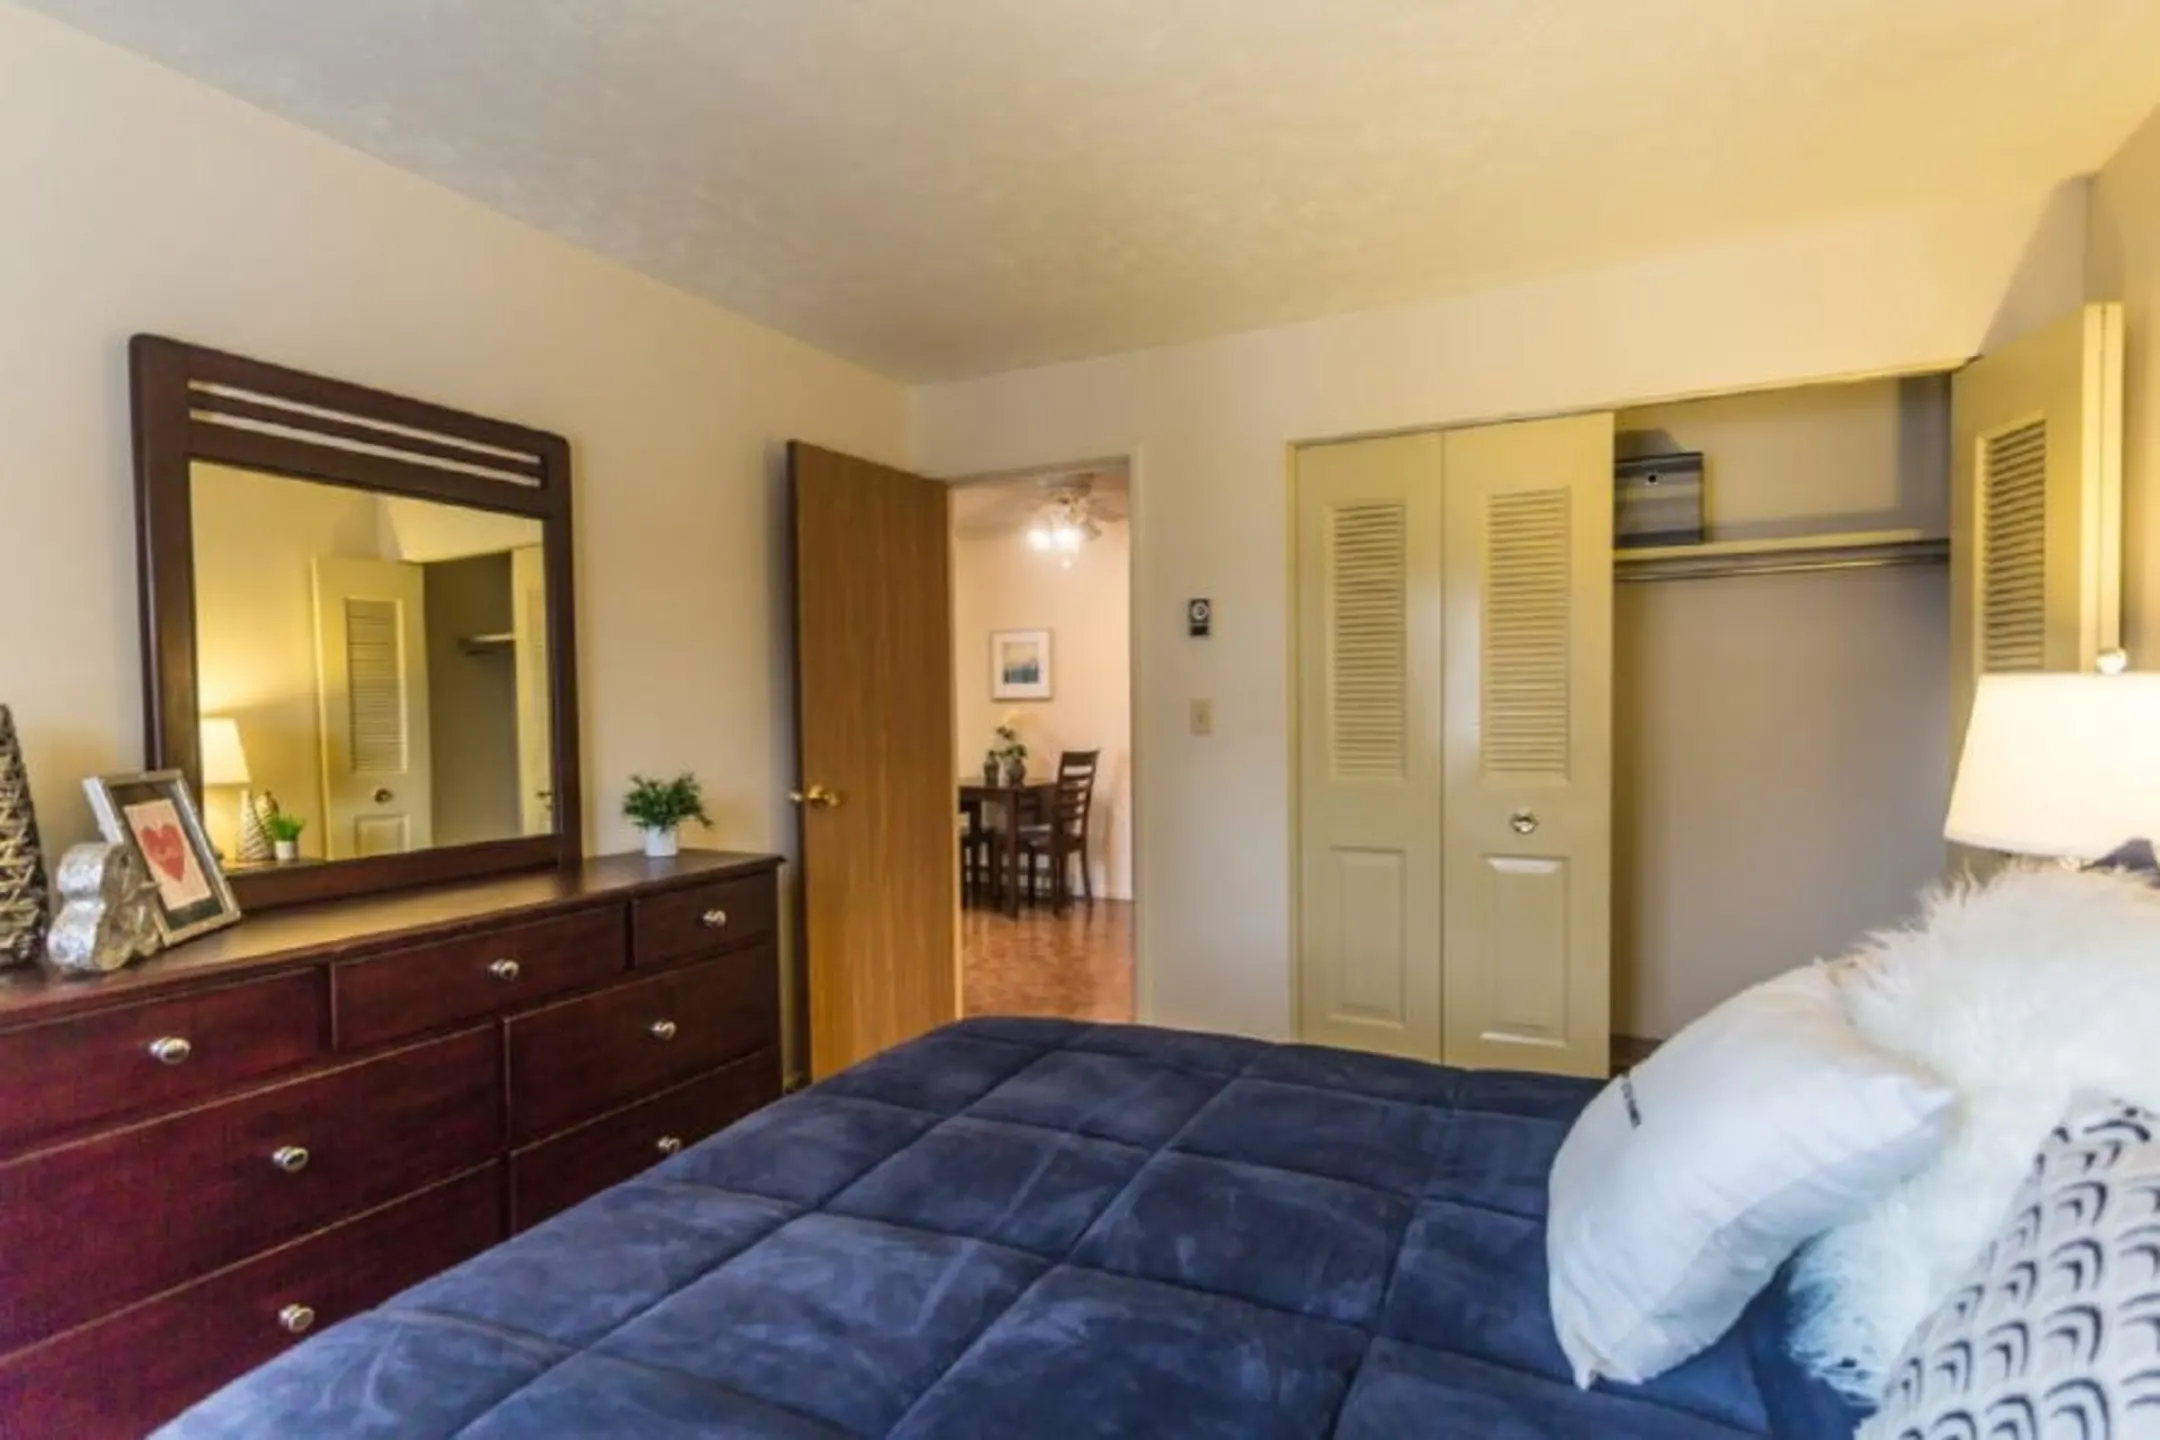 Bedroom - Peppertree Apartments - Niles, OH